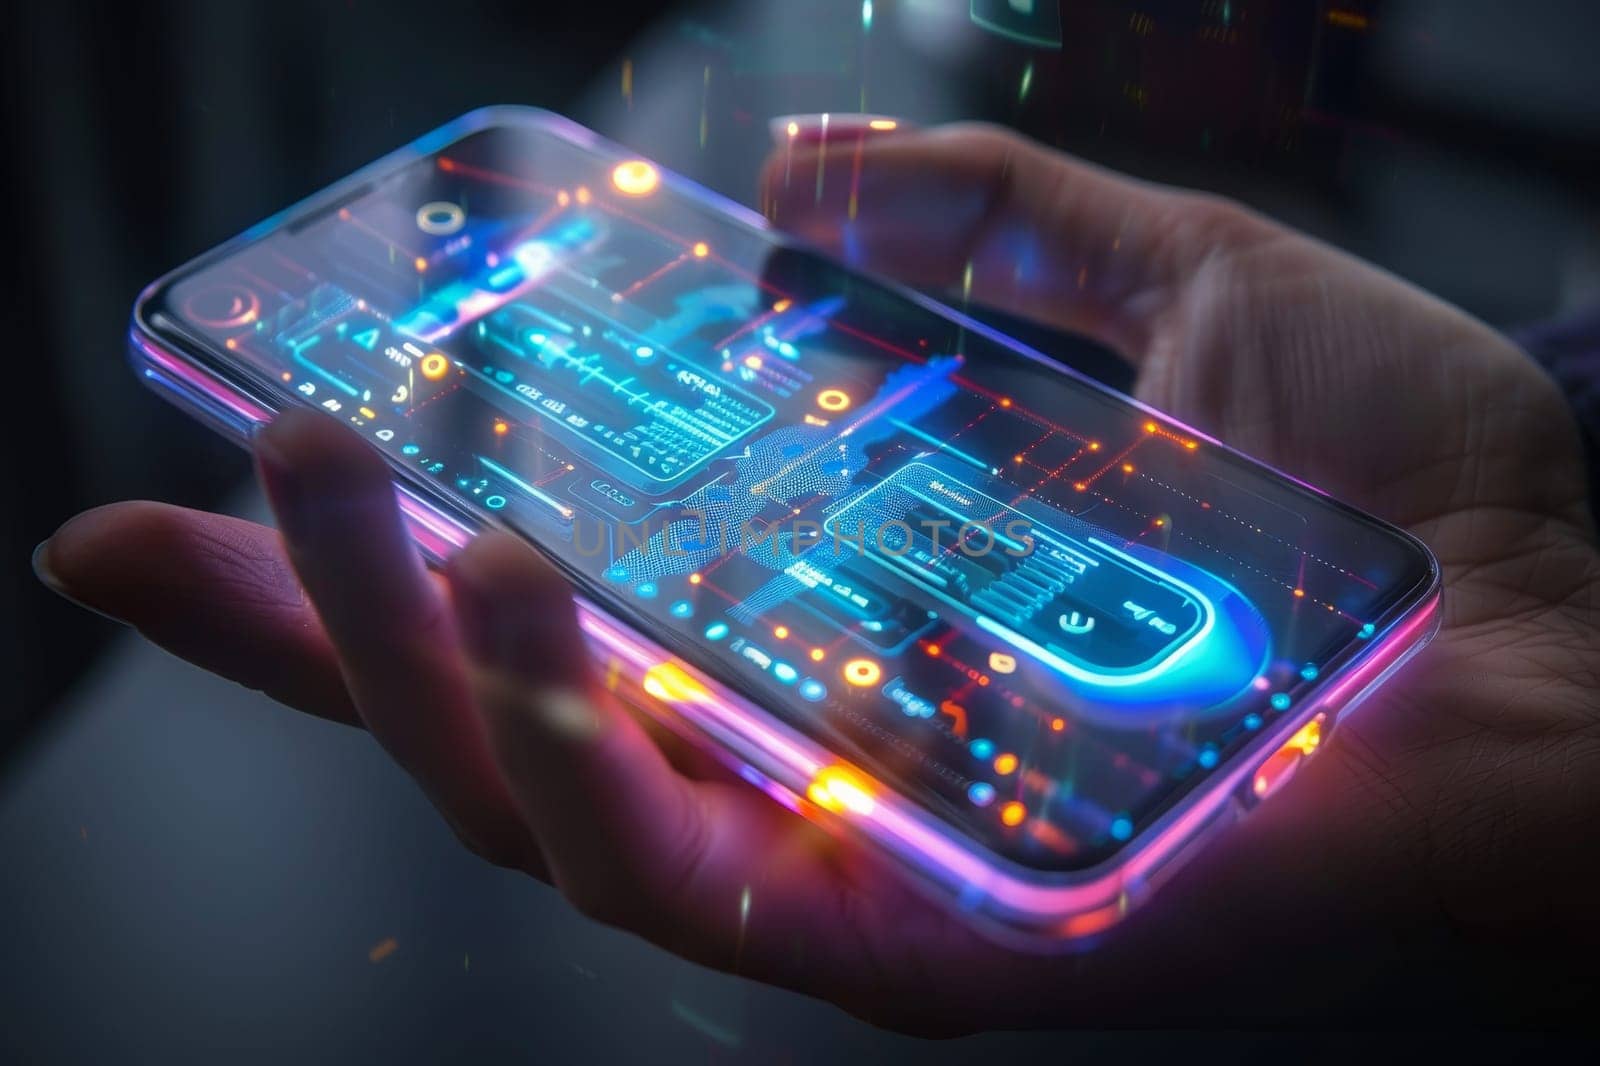 Artificial Intelligence smartphone with an interface translucent screen, technology futuristic